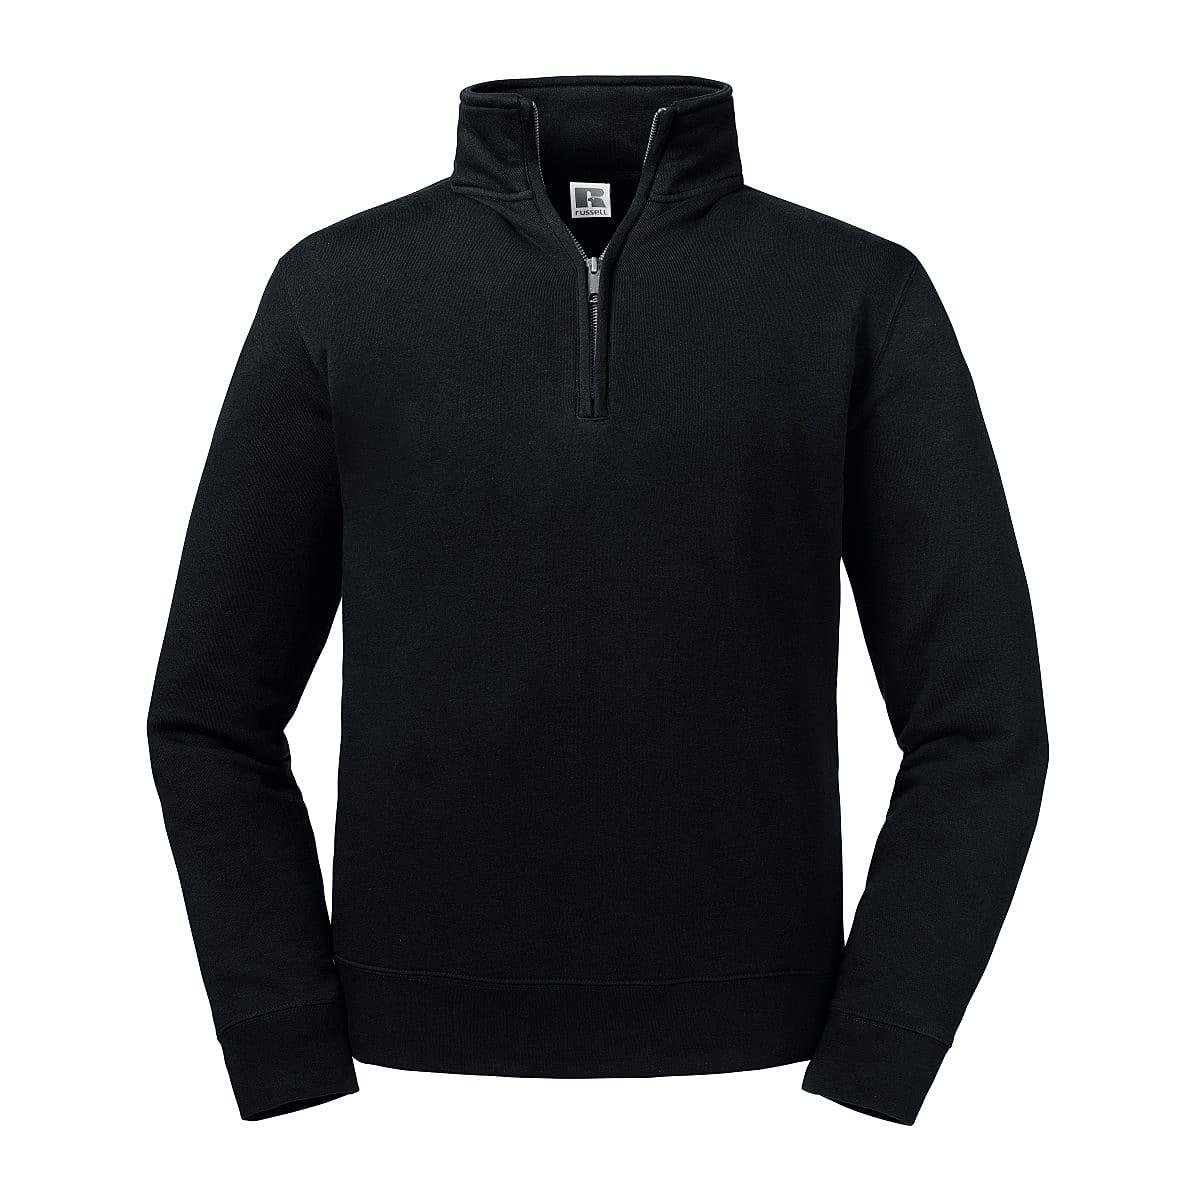 Russell Authentic 1/4 Zip Sweater in Black (Product Code: R270M)